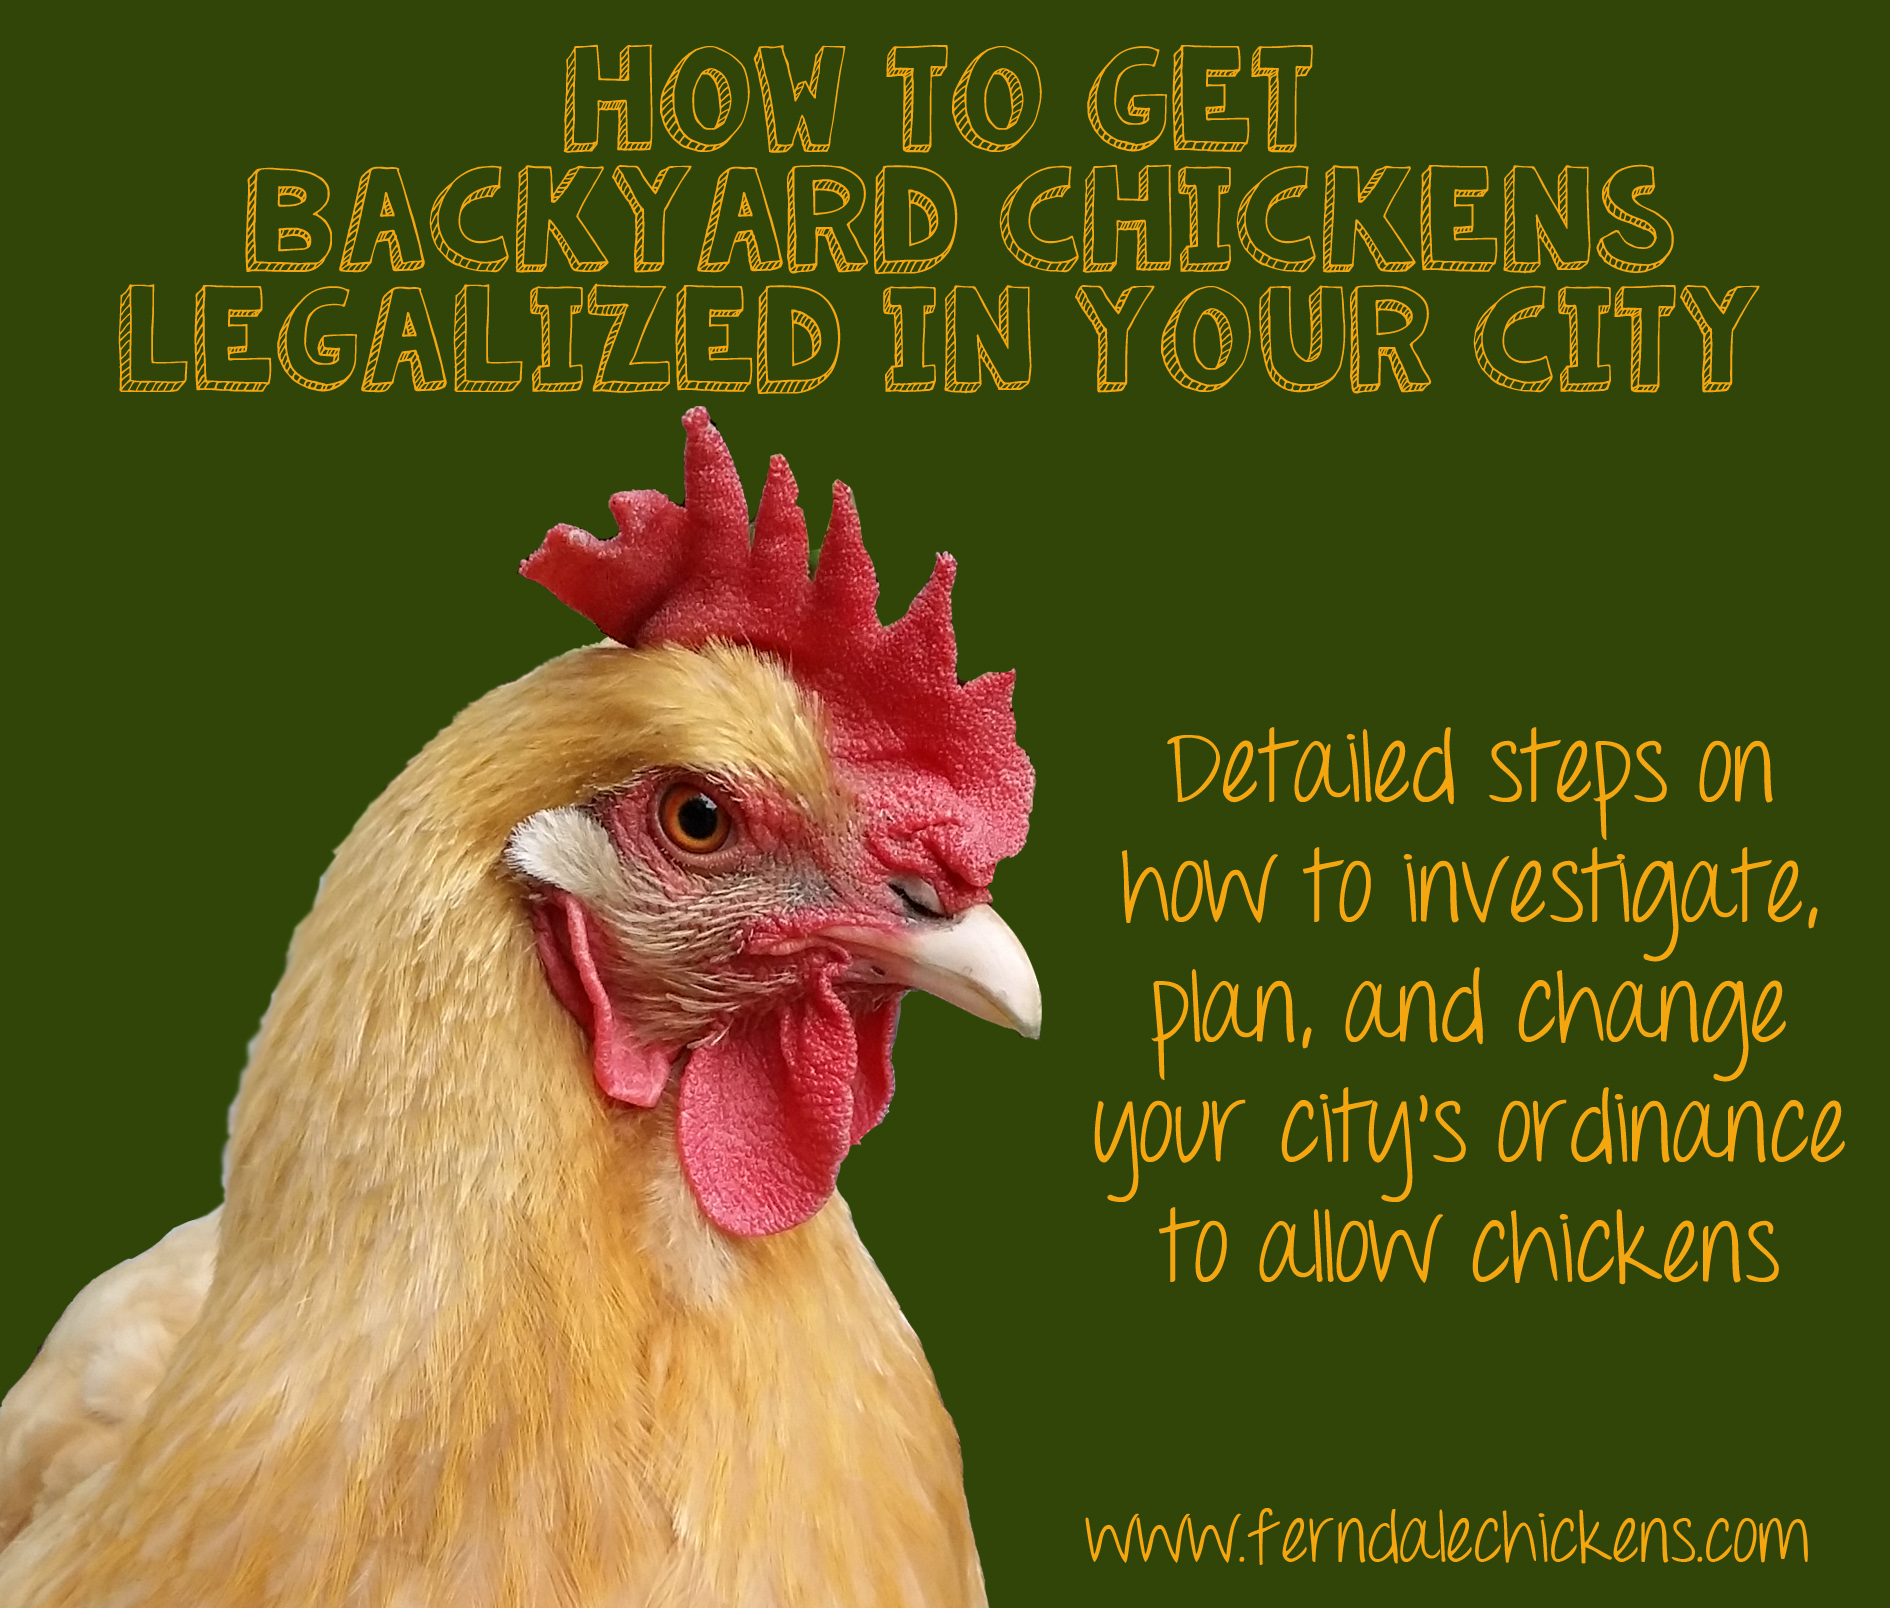 How To Get Backyard Chickens Legalized In Your City Ferndale Chickens